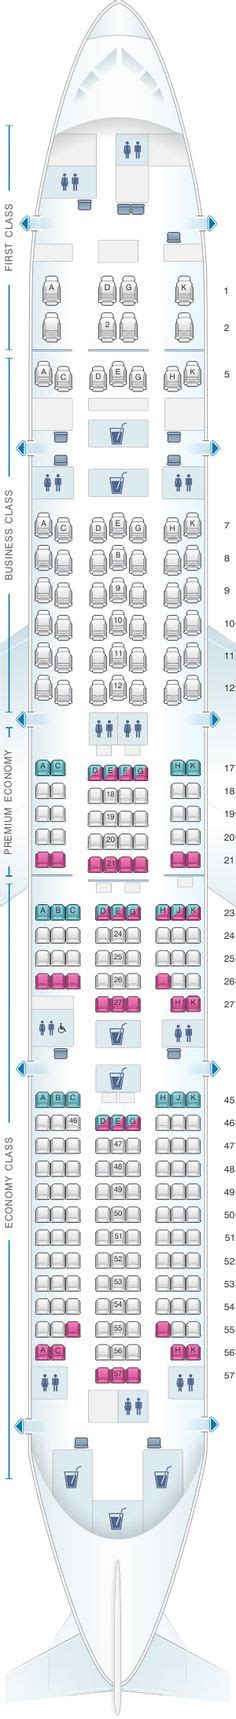 Seat Map For Latam Airlines Brasil Airbus A320 174pax Best Airplane